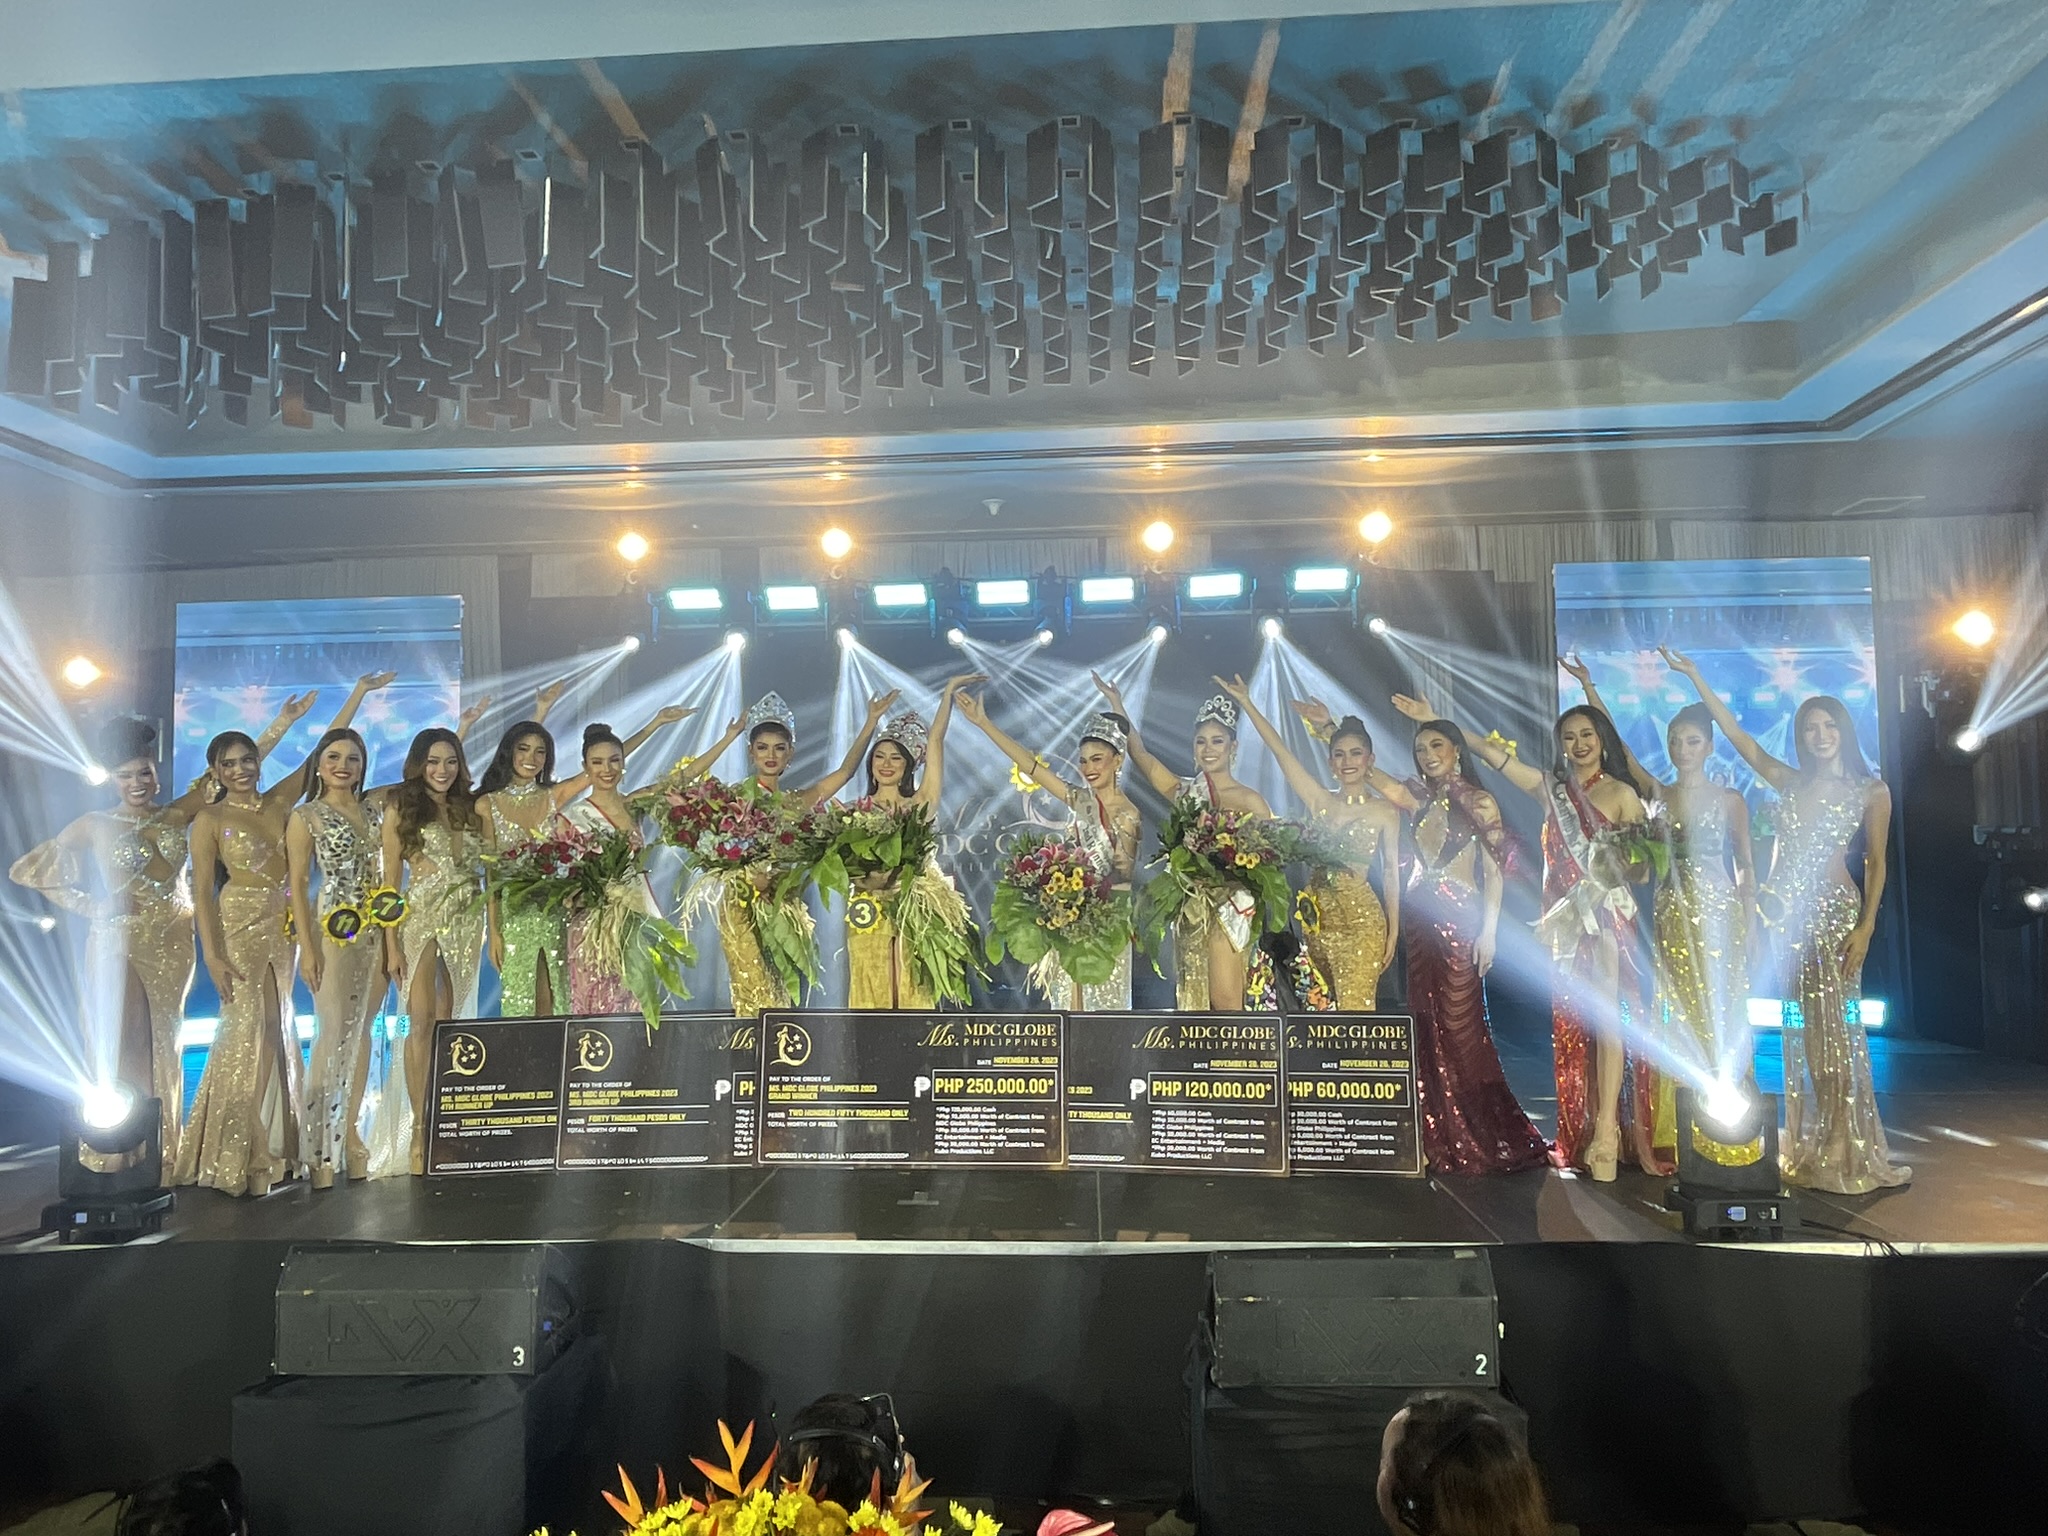 Iloilo City Beauty Crowned First Miss MDC Globe Philippines